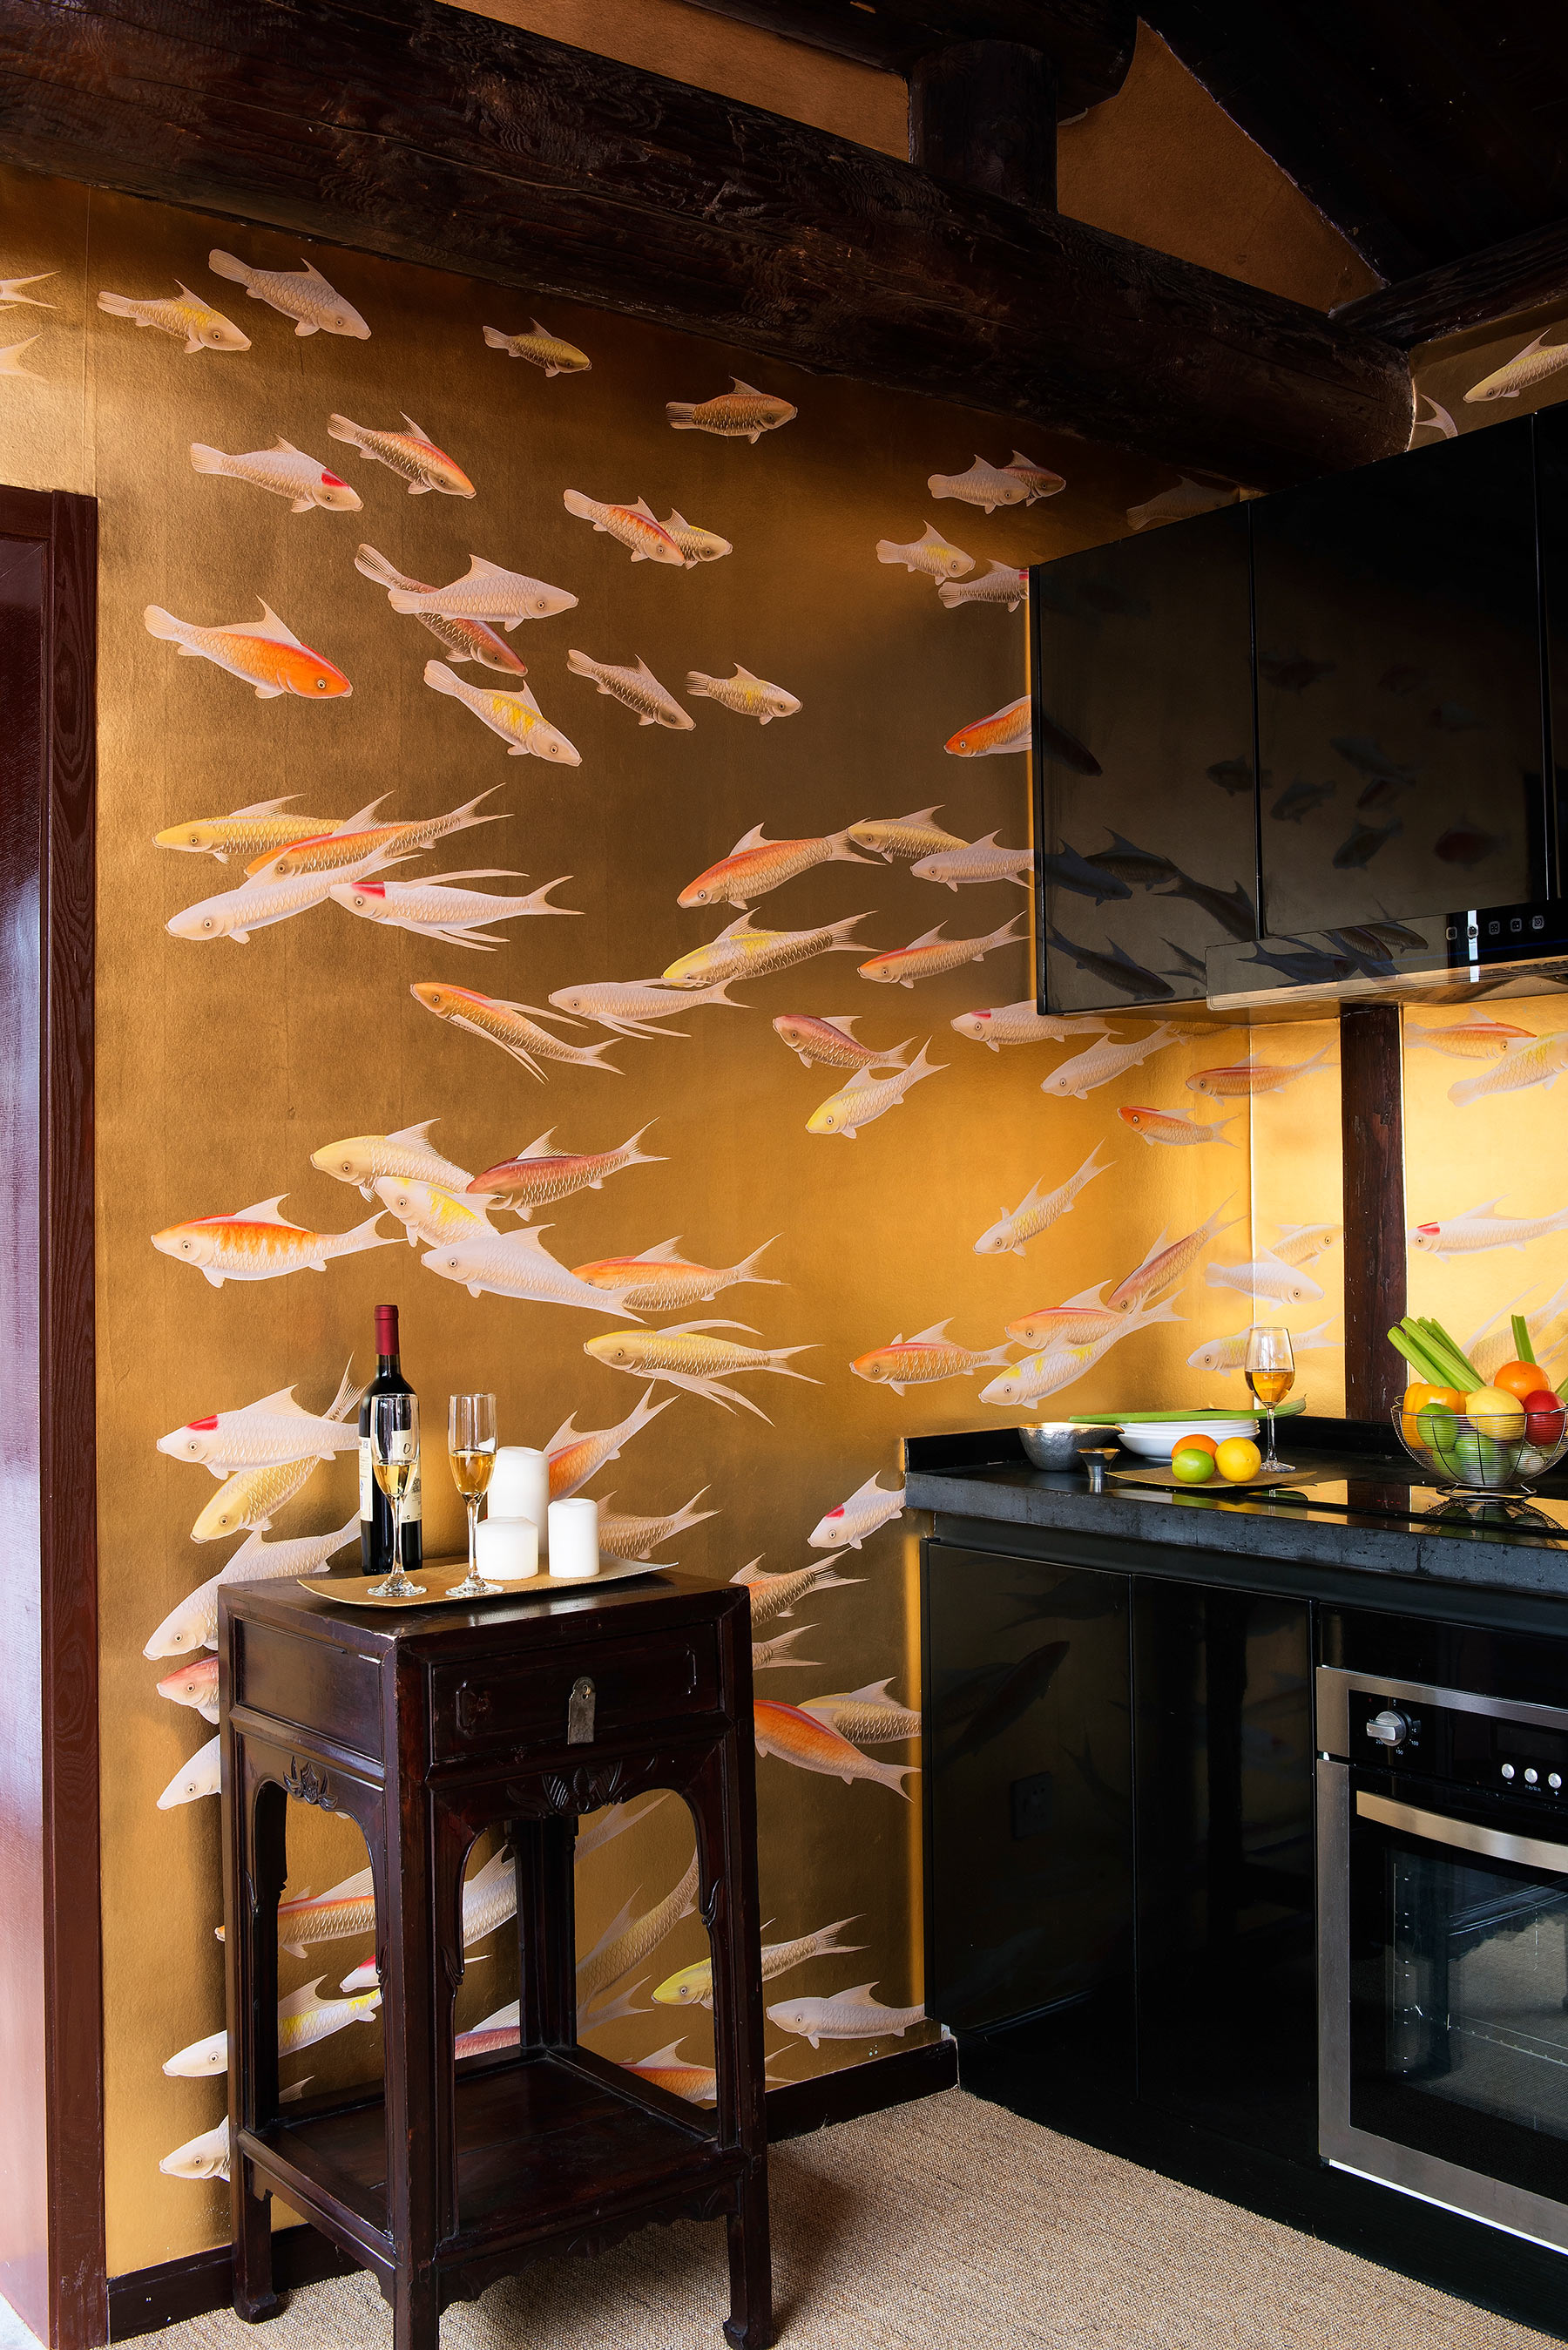 'Fishes' in Koi design colours on Deep Rich Gold gilded paper